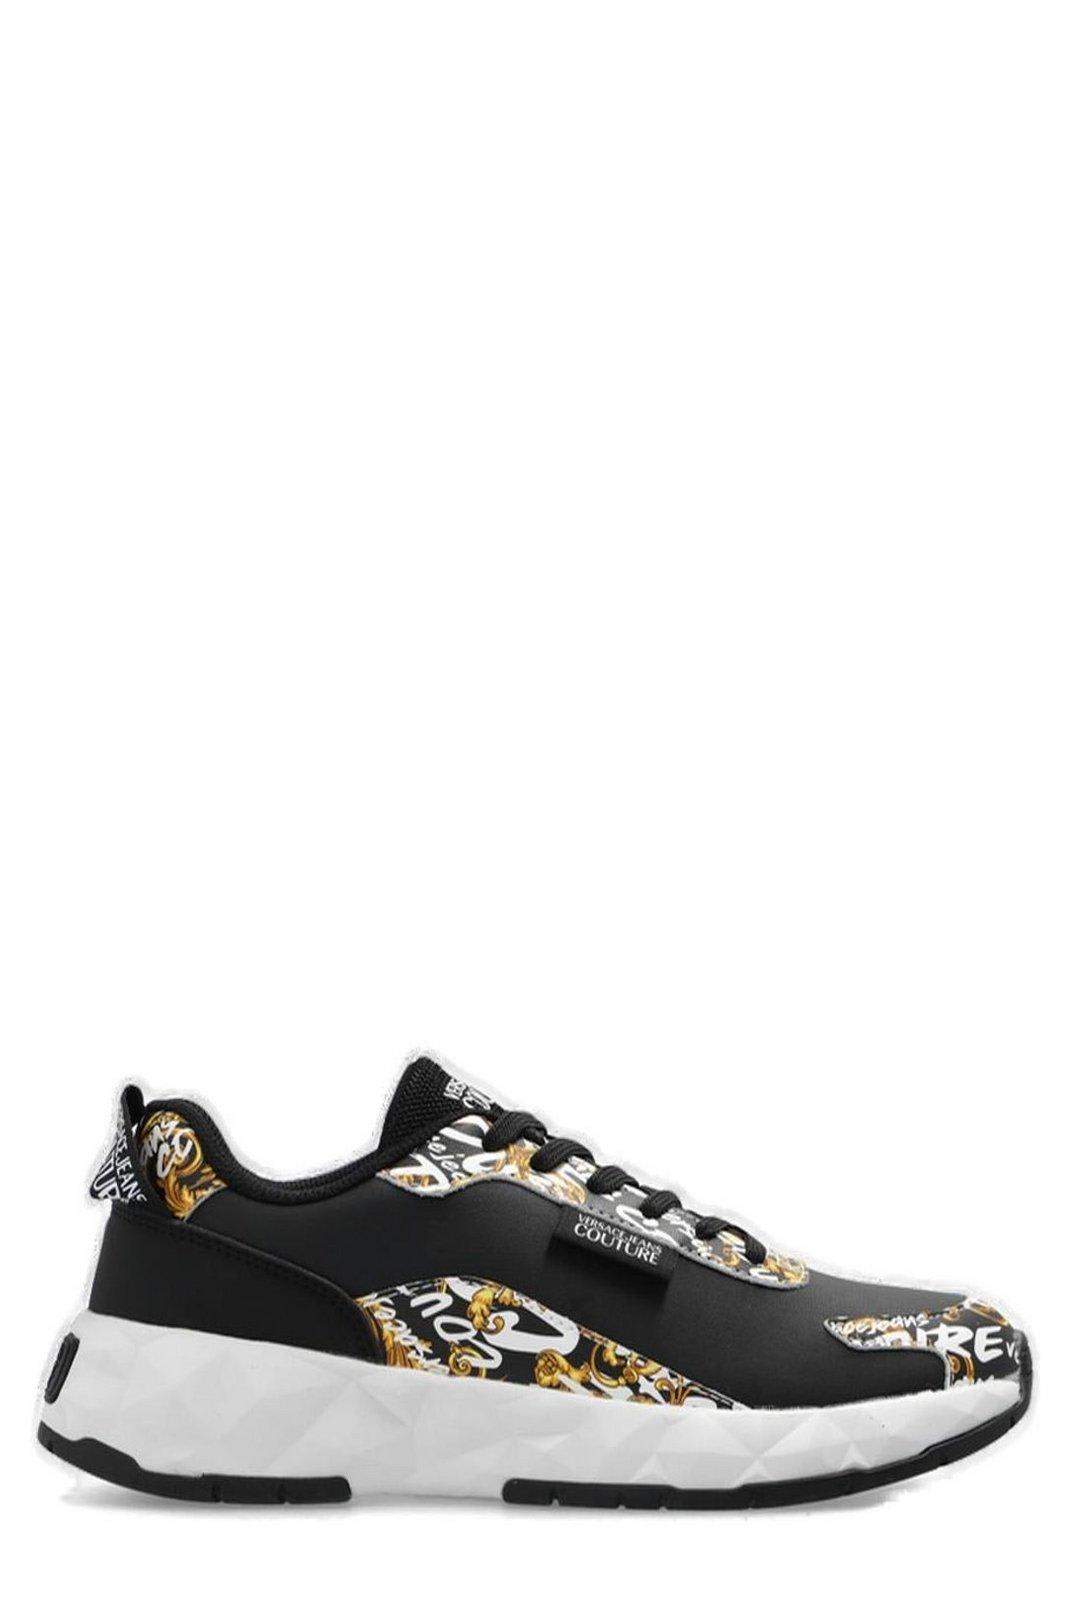 VERSACE JEANS COUTURE ALL-OVER ATOM LOGO COUTURE SNEAKERS